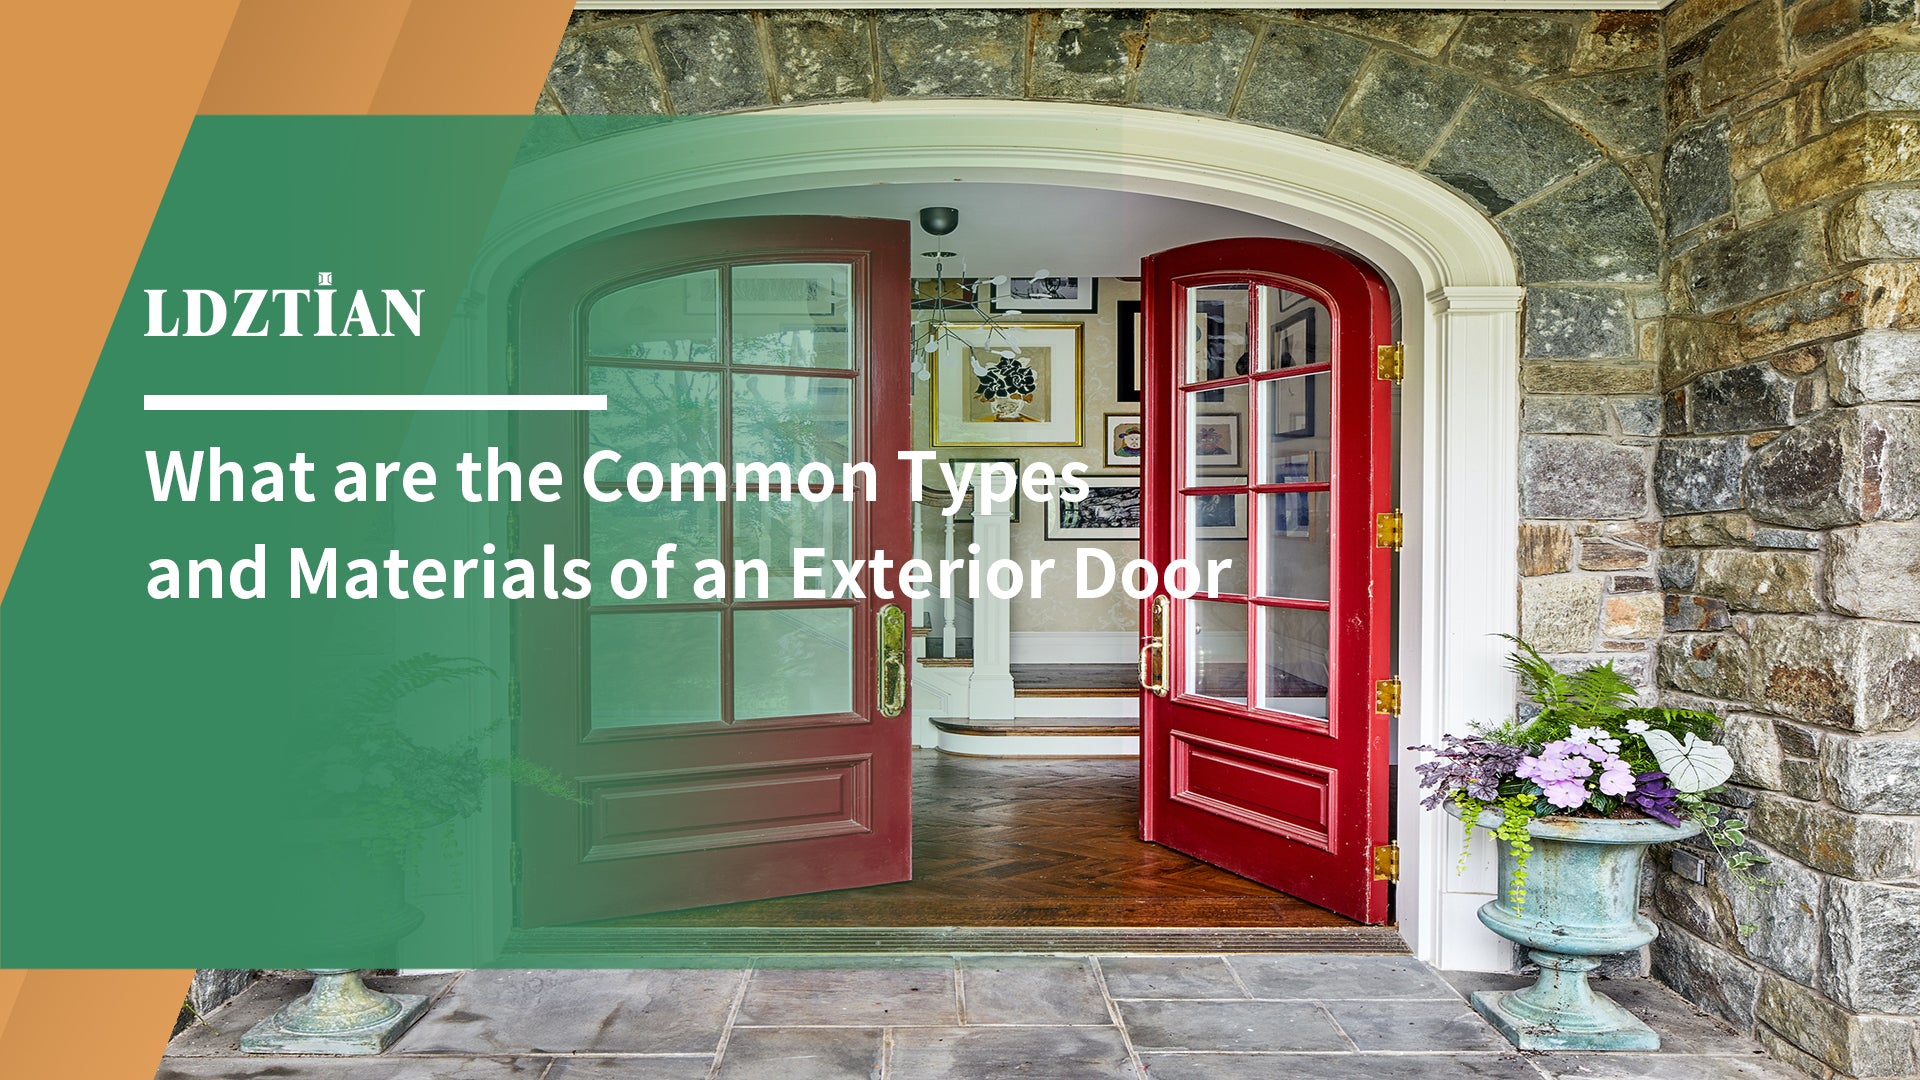 What are the Common Types and Materials of an Exterior Door?